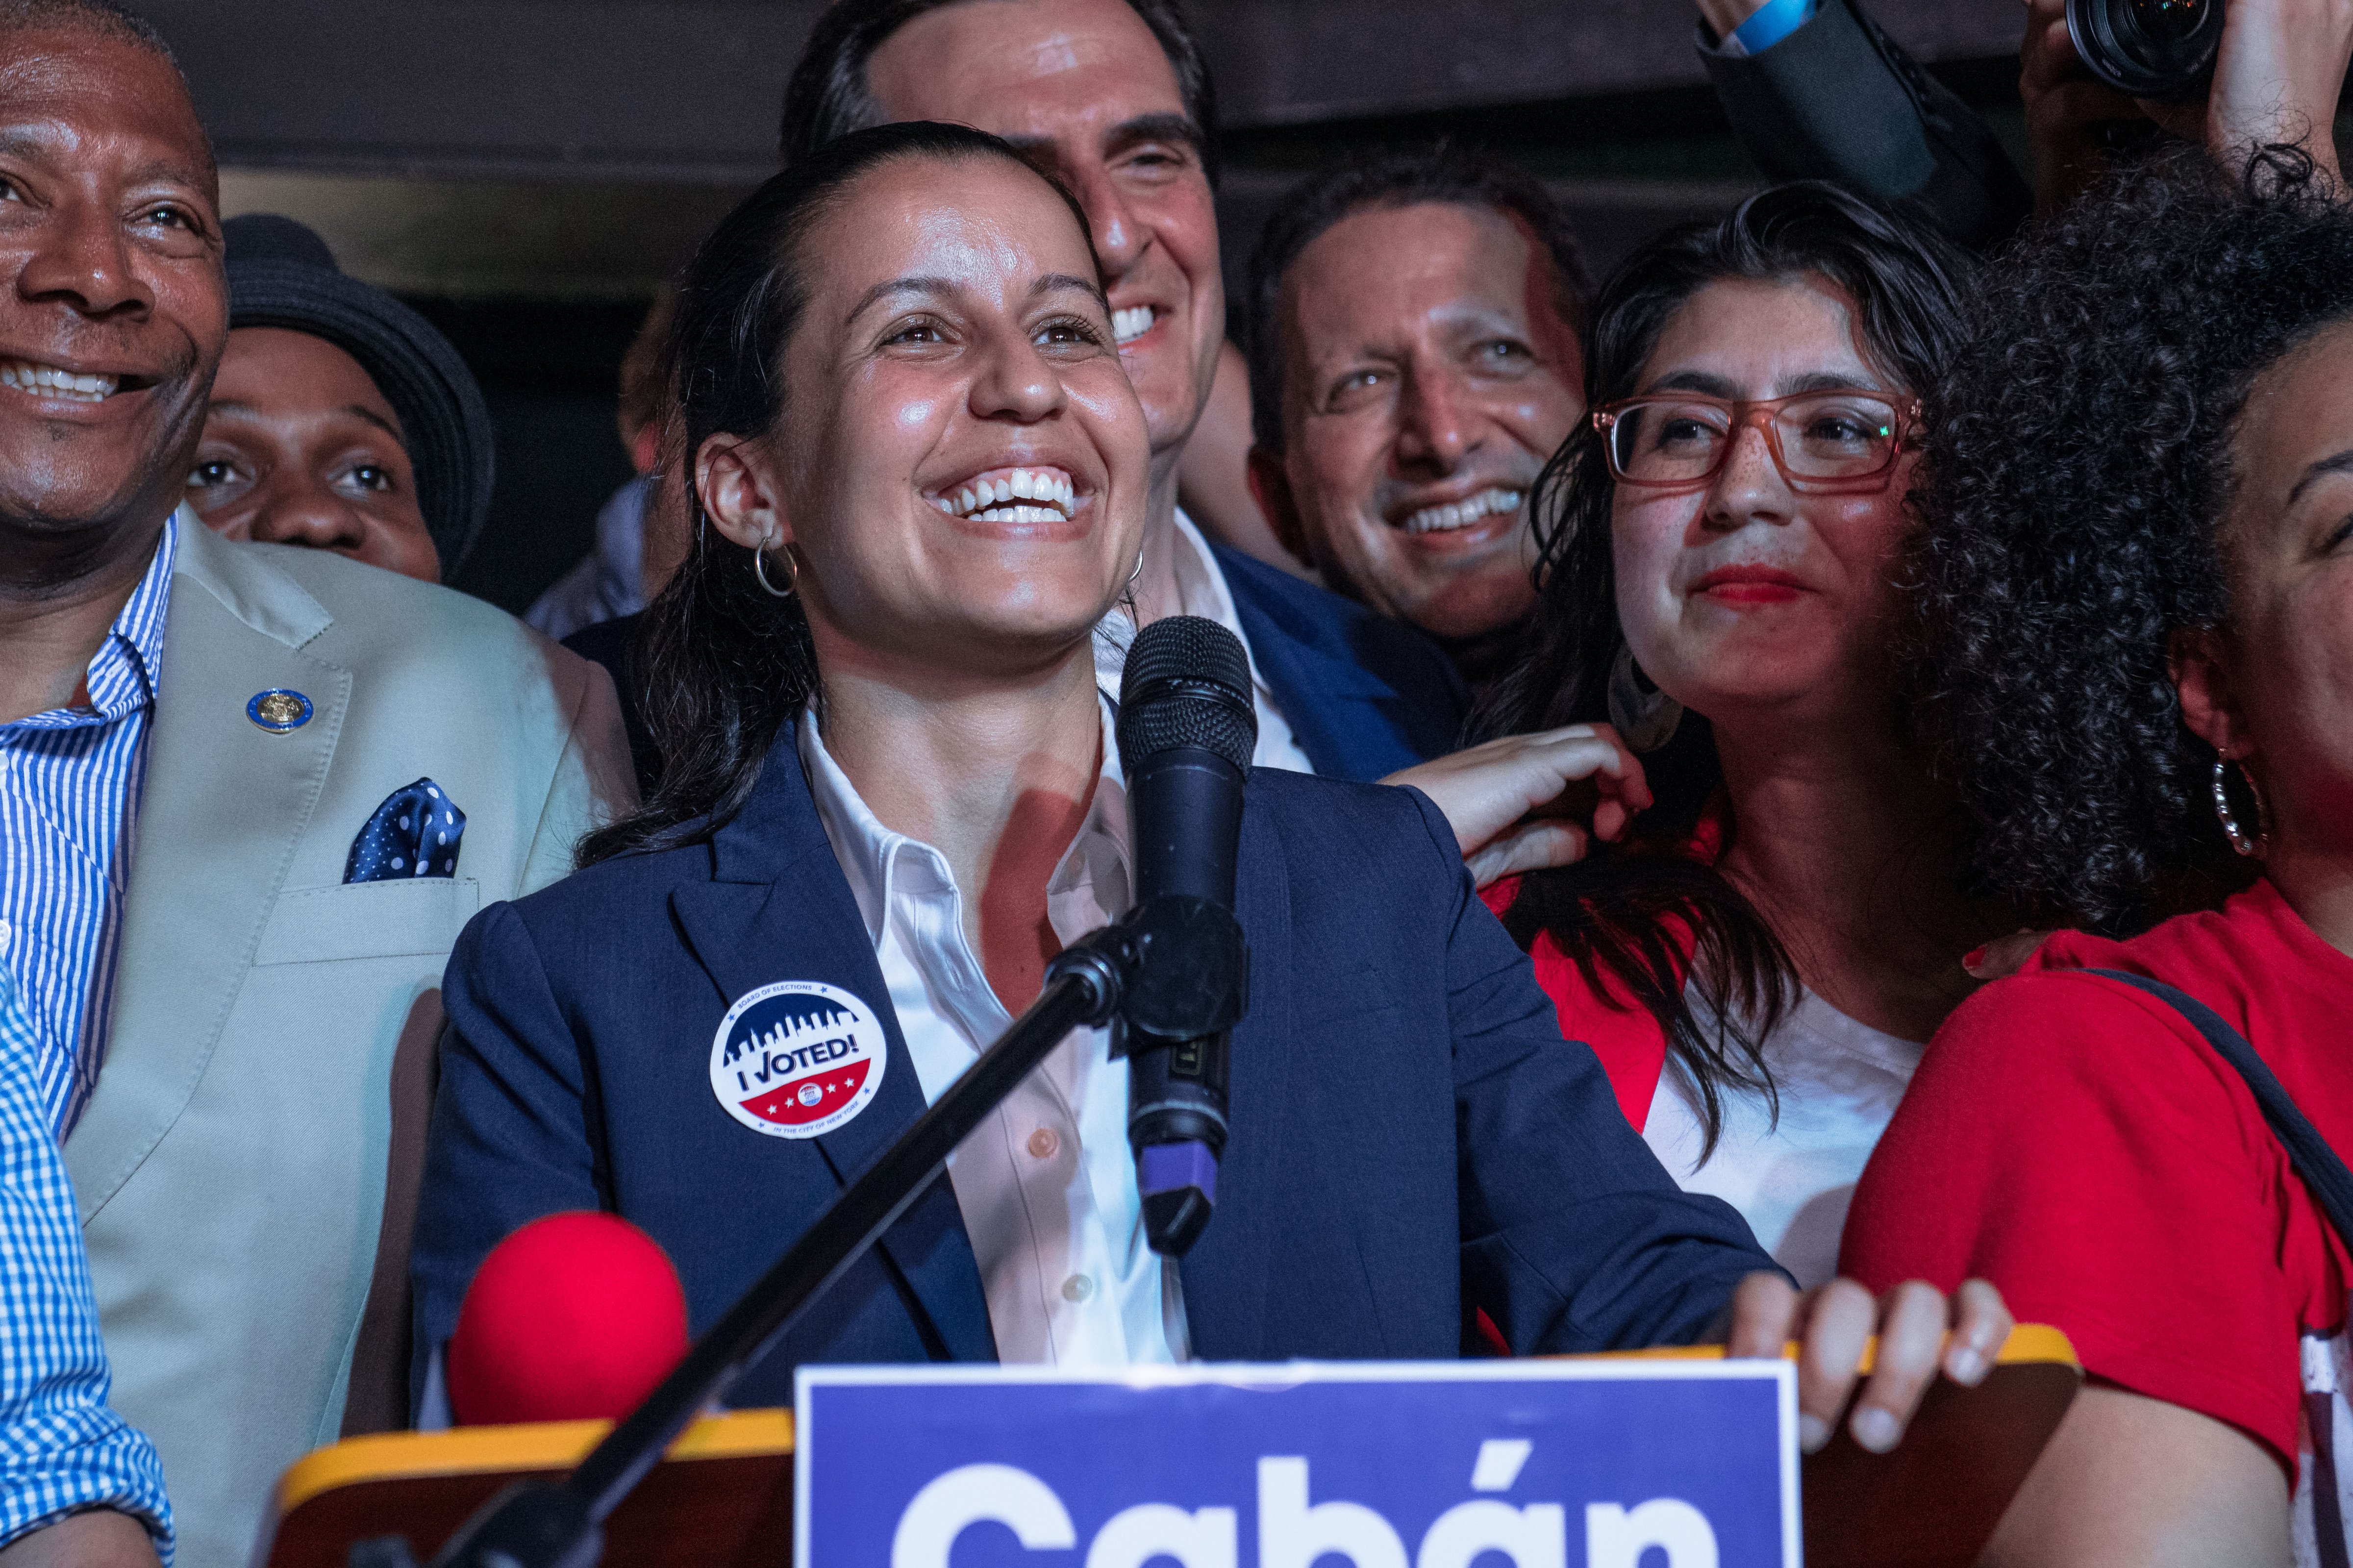 Public defender Tiffany Cabán declares victory in the Queens District Attorney Democratic primary election at her campaign watch party at La Boom nightclub, on June 25, 2019 in the Queens borough of New York City. (Scott Heins/Getty Images)